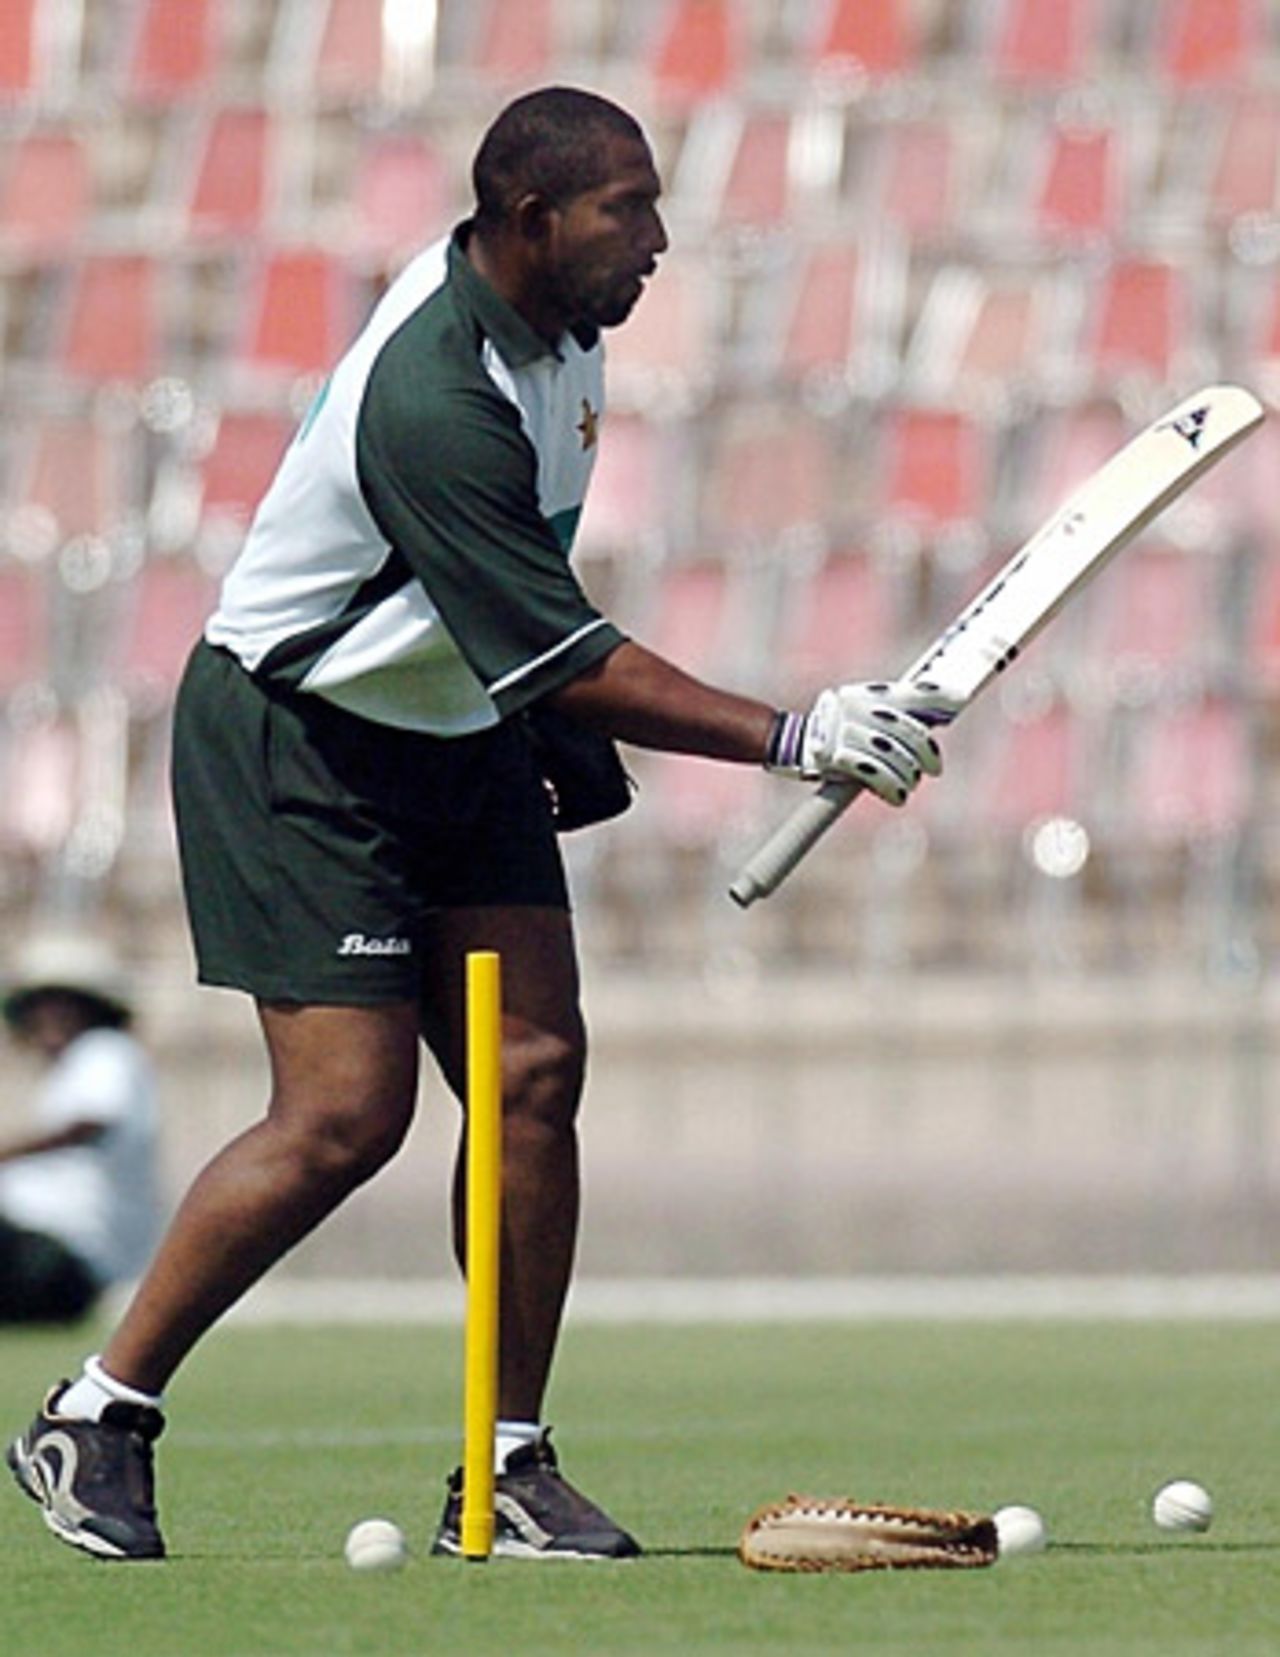 Phil Simmons takes a fielding practice, Dhaka, March 2005